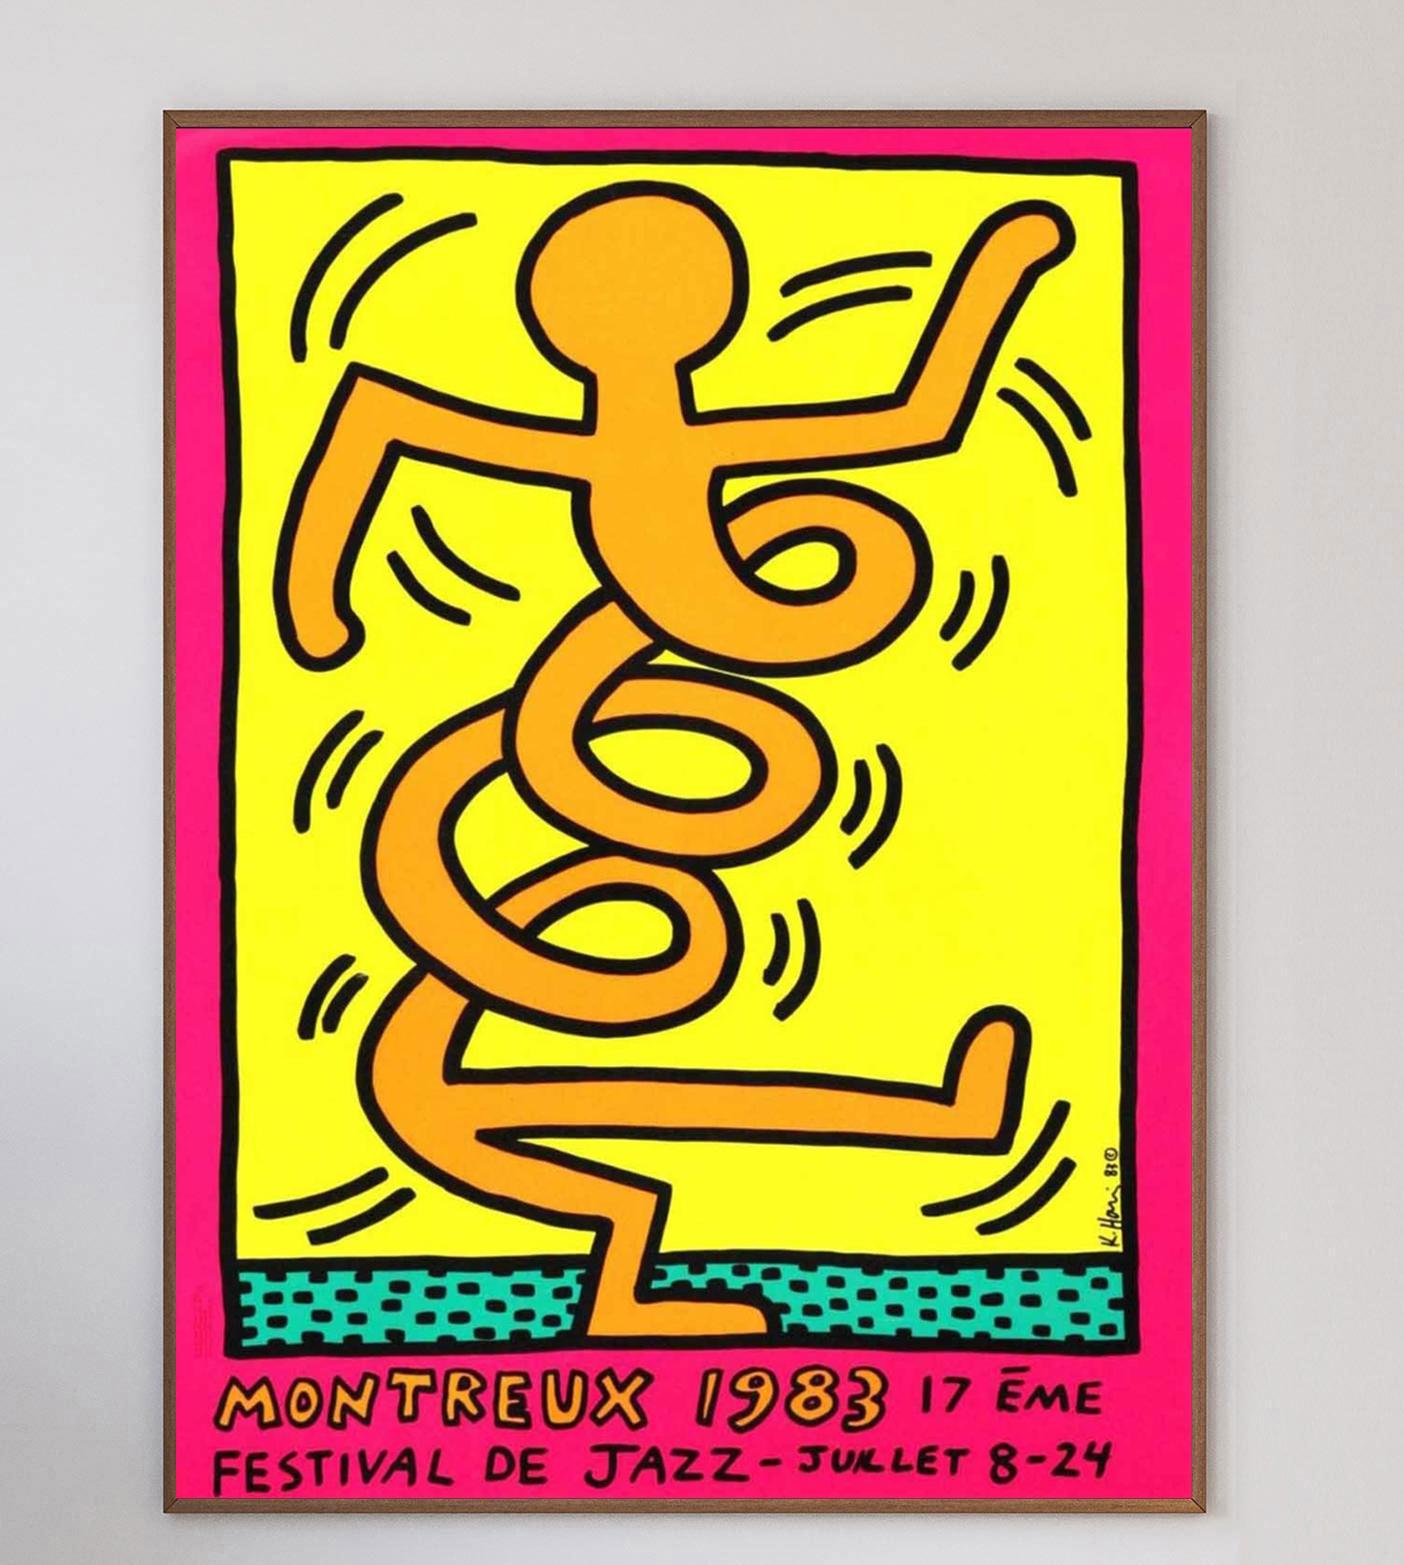 In 1983, Keith Haring was asked to create a poster for the iconic Montreux Jazz Festival, in turn, he submitted 3 designs which were instantly accepted. Haring visited Montreux for the event and spent the entire time painting and creating art around